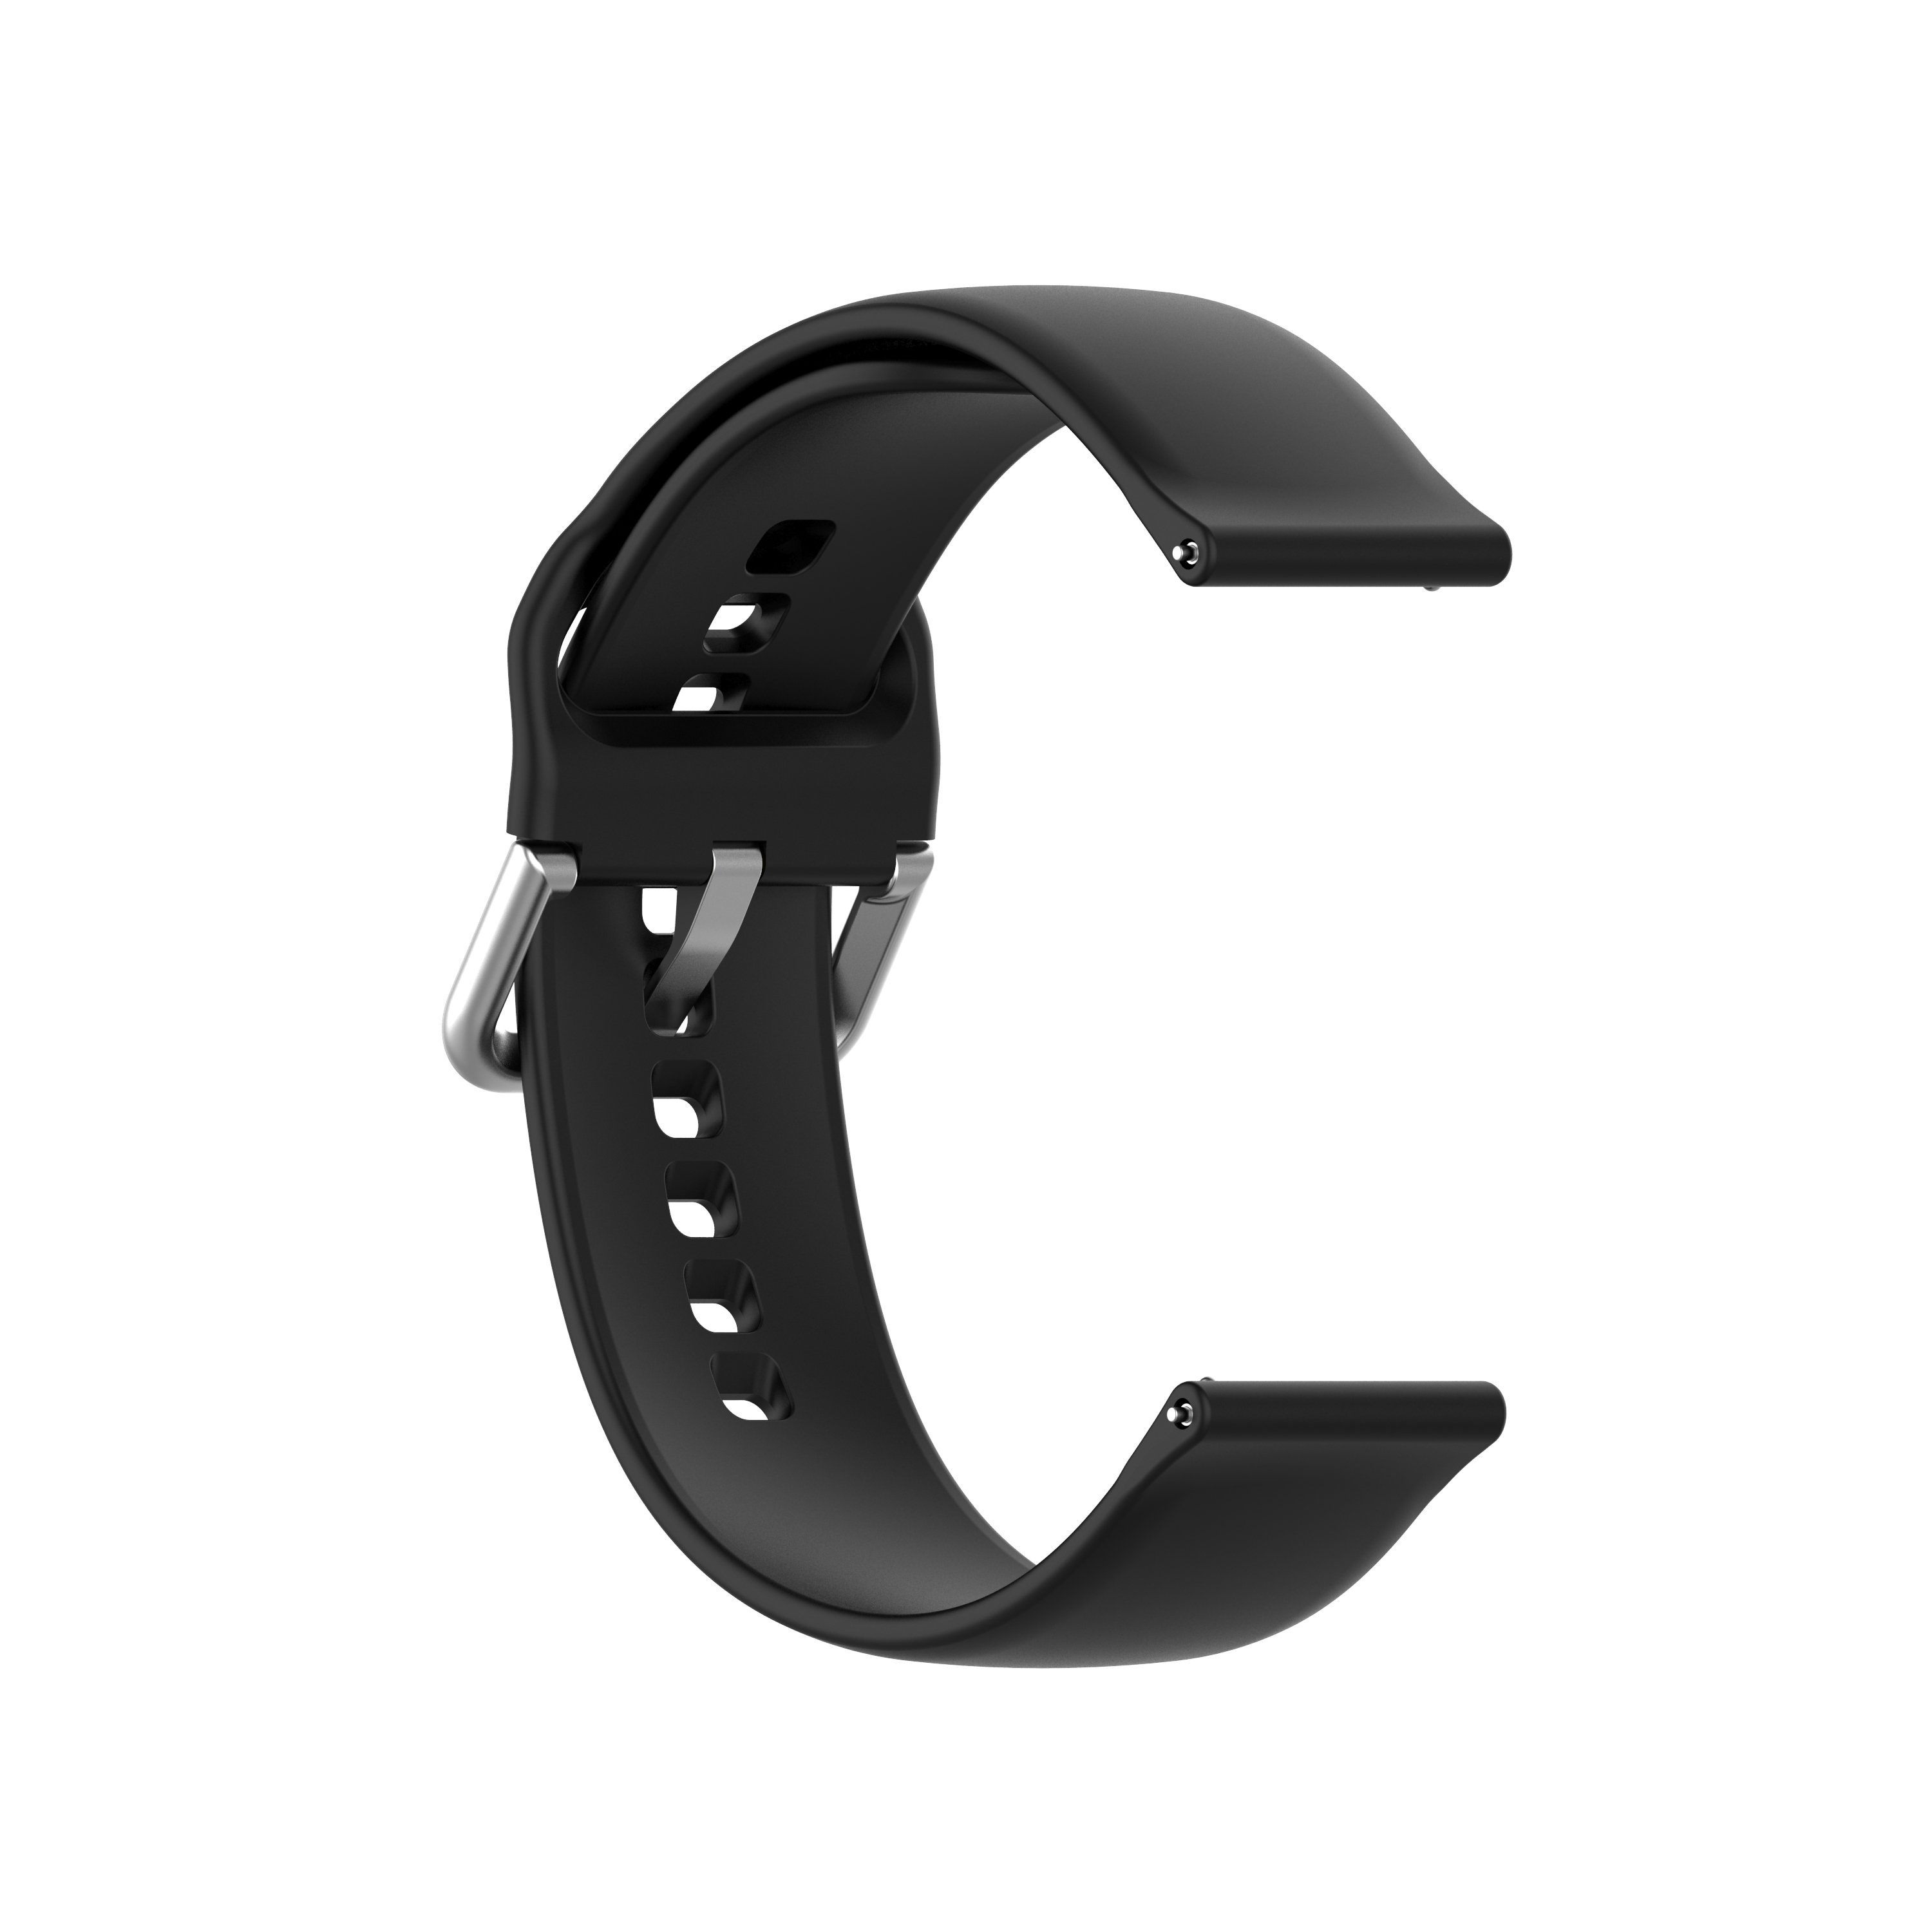 Bakeey-22mm-Width-Universal-Pure-Sport-Soft-Silicone-Watch-Band-Strap-Replacement-for-Samsung-Galaxy-1731525-5